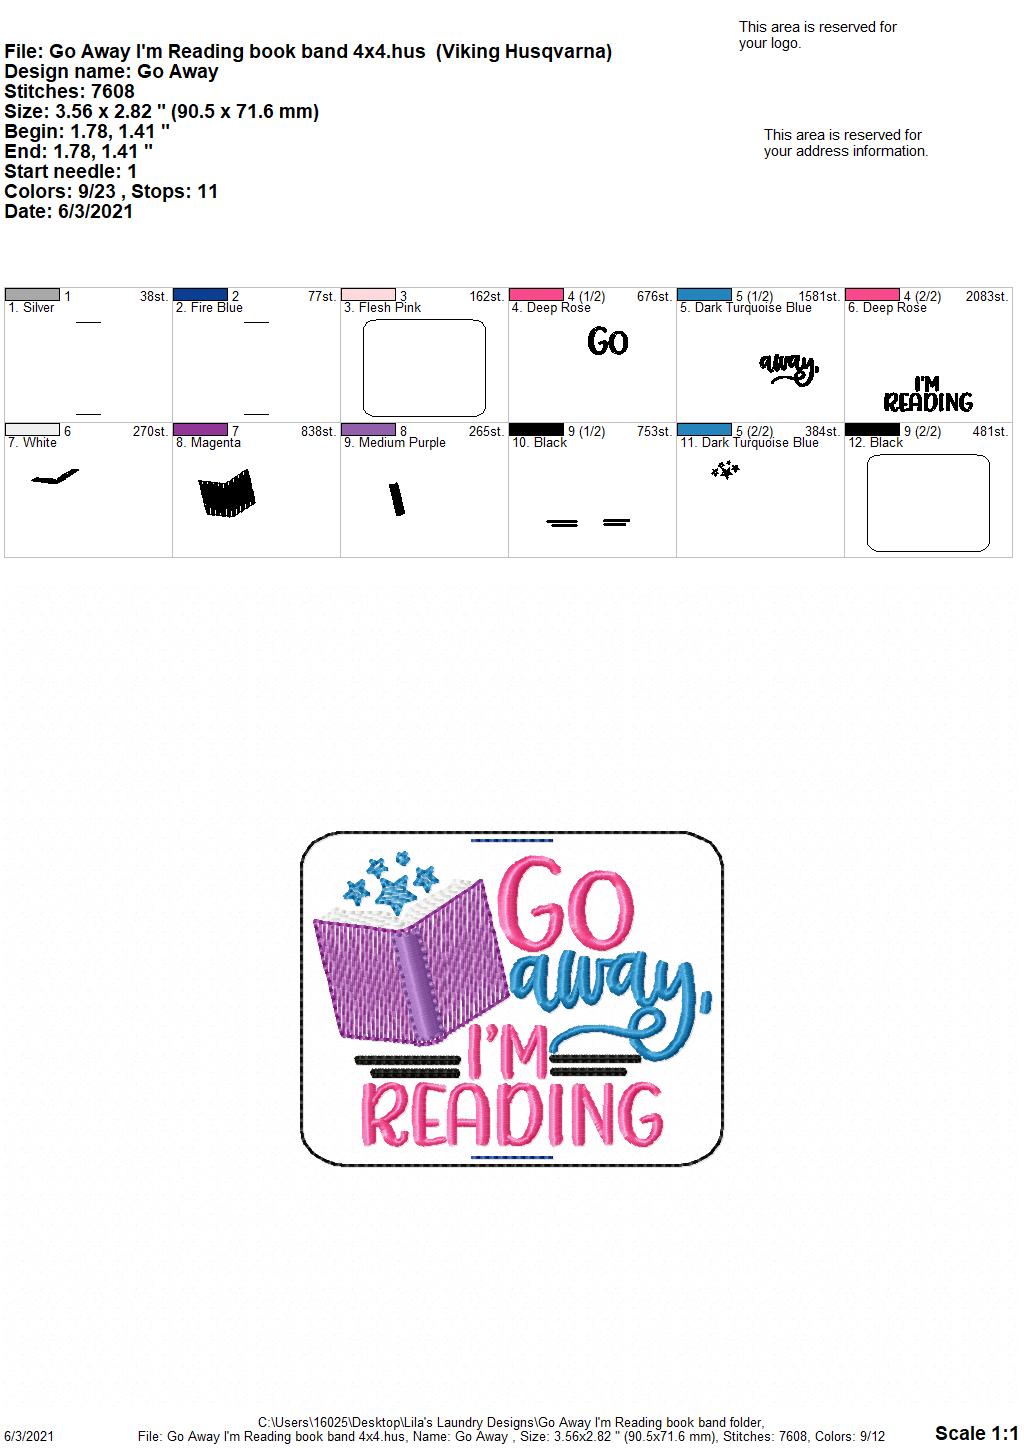 Go Away I'm Reading Book Band - Embroidery Design, Digital File